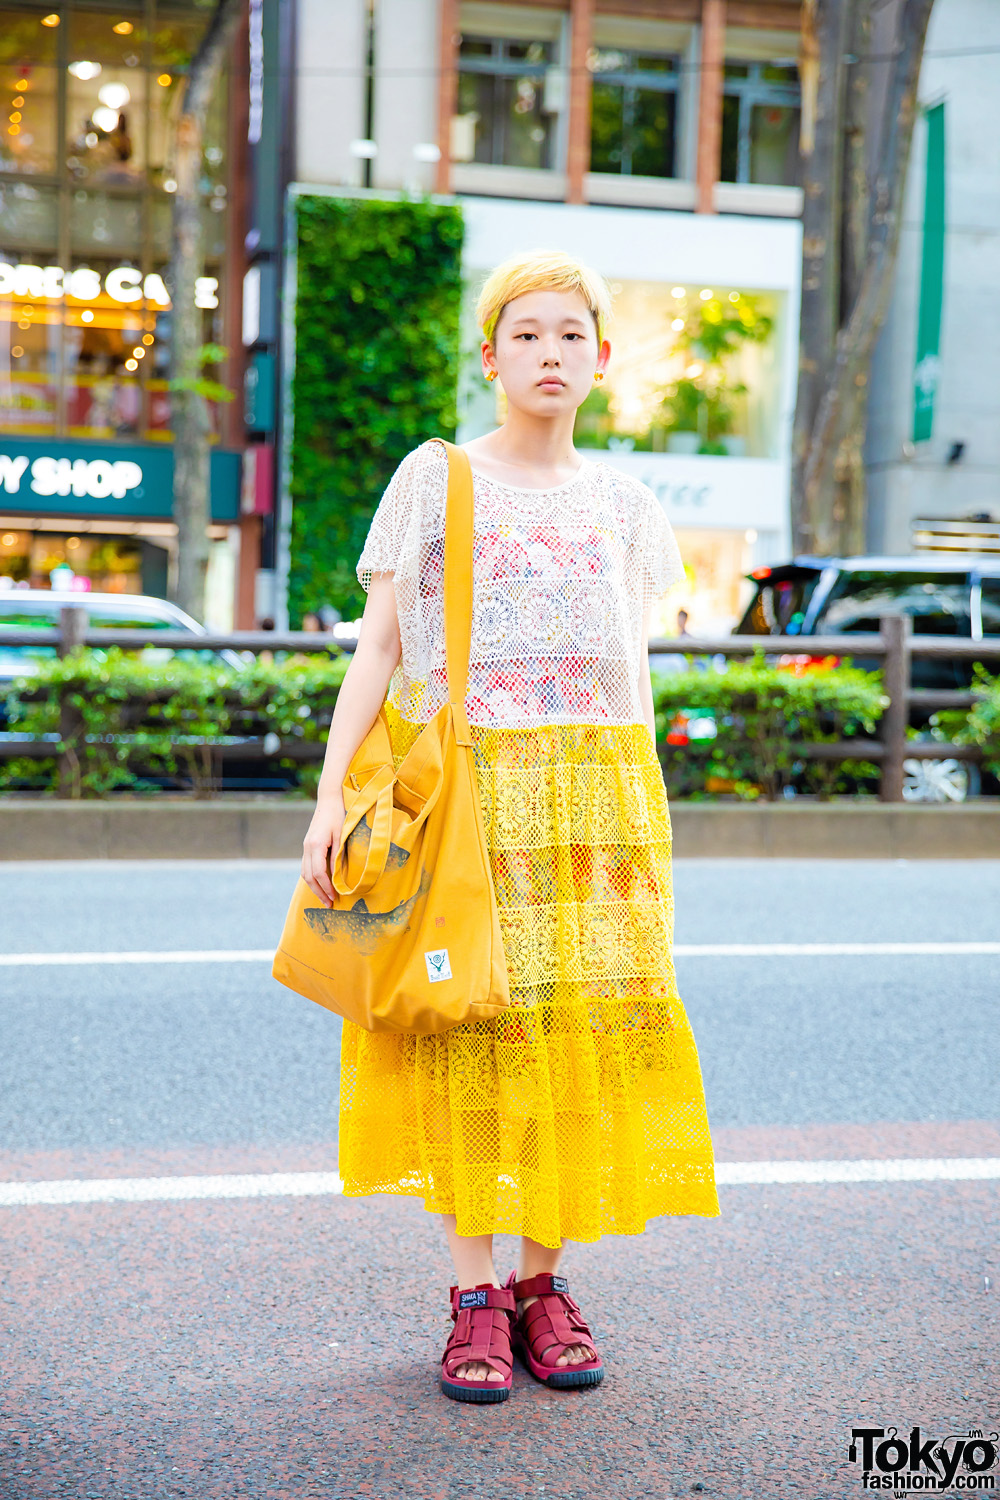 Harajuku Street Style w/ Pixie Cut, Zara Knit Dress Over UNIQLO Floral Dress, Freak's Store Sandals & South2 West8 Tote Bag